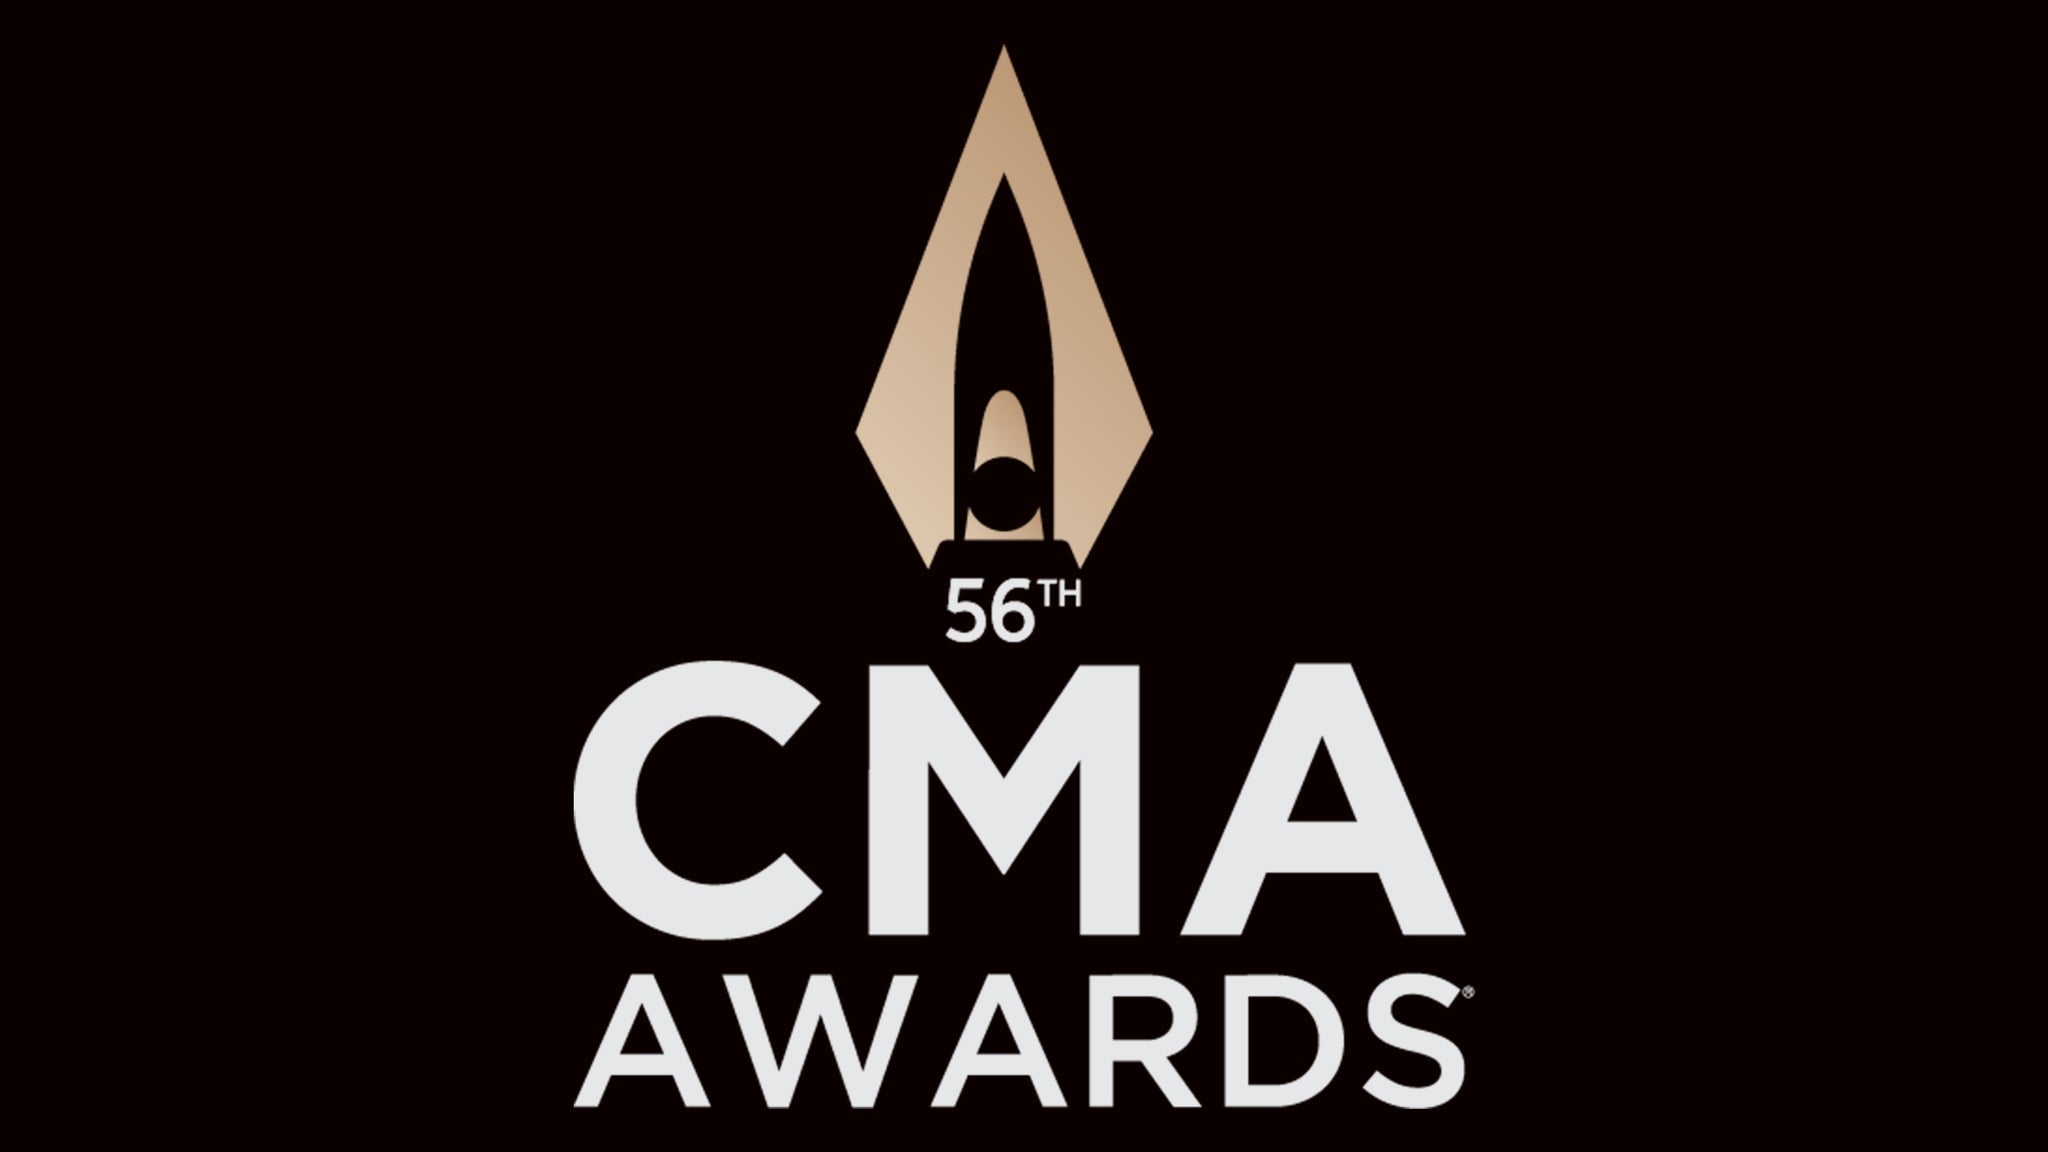 CMA Awards 2022 - Full List Of Nominees And Winners